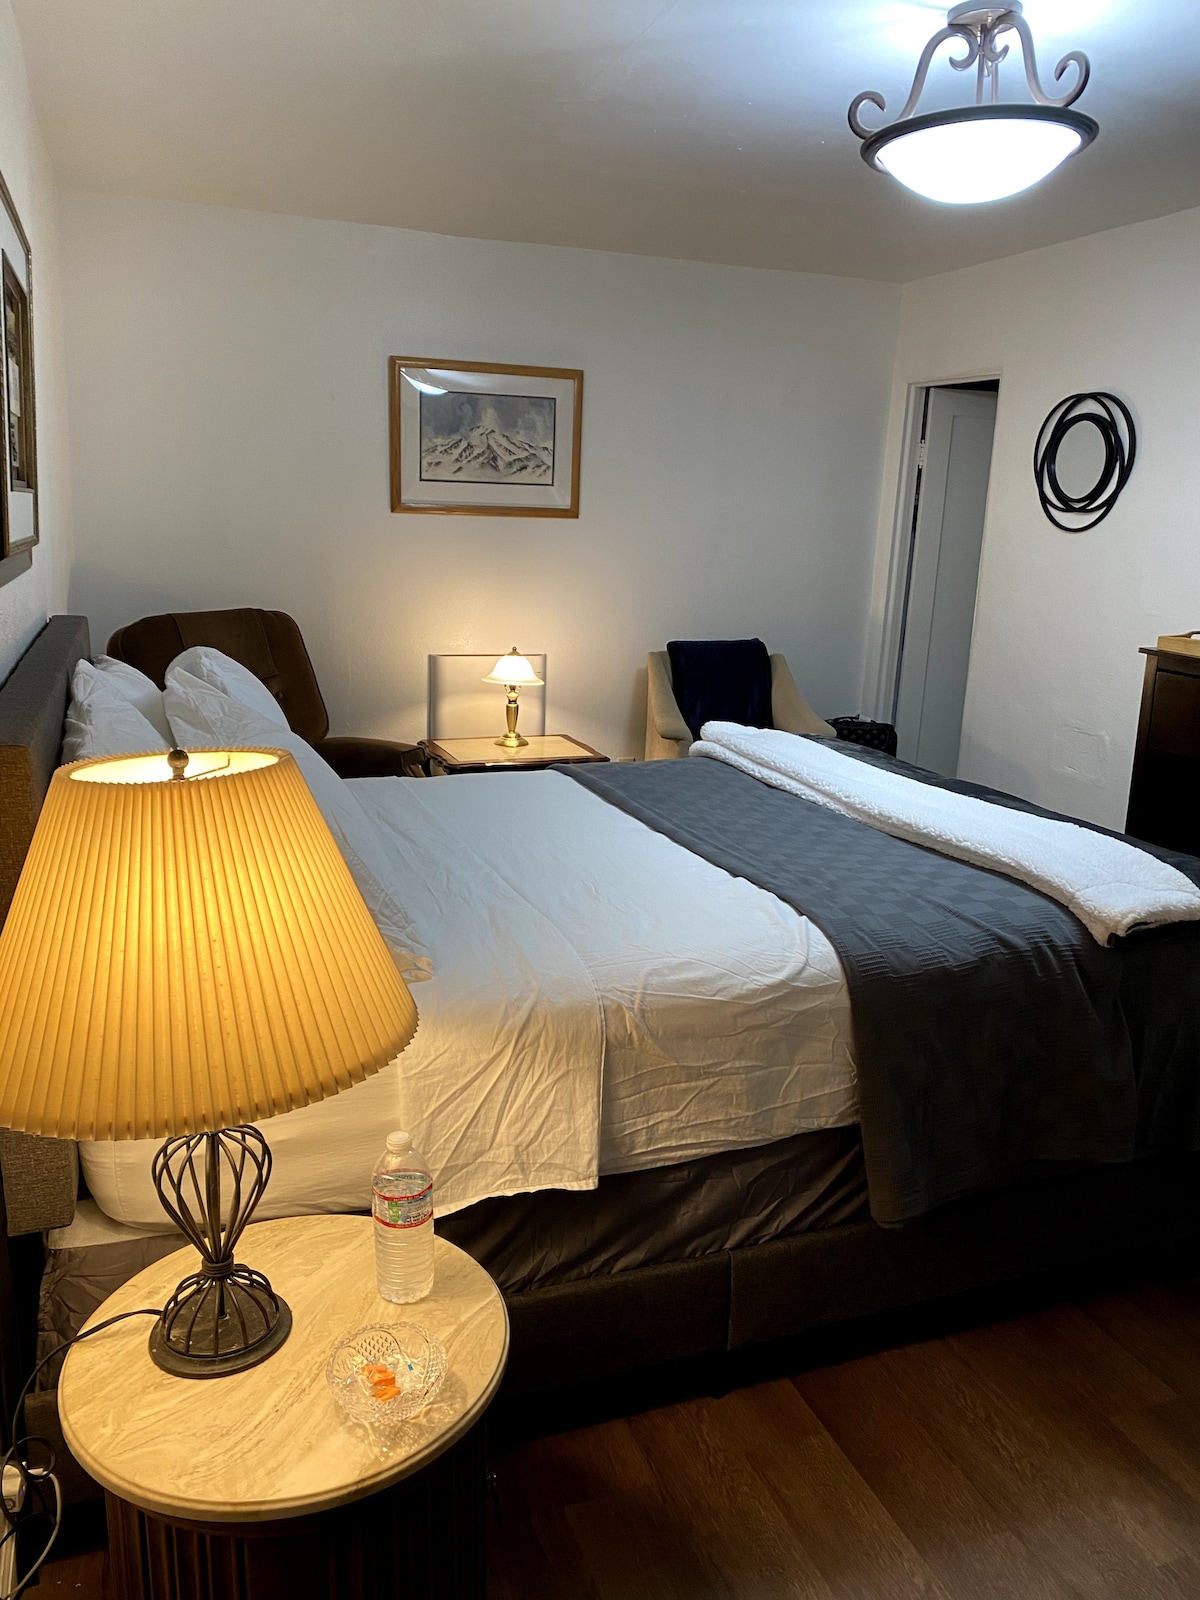 2B/2B Renovated adjoining rooms suite (#4 & #5)